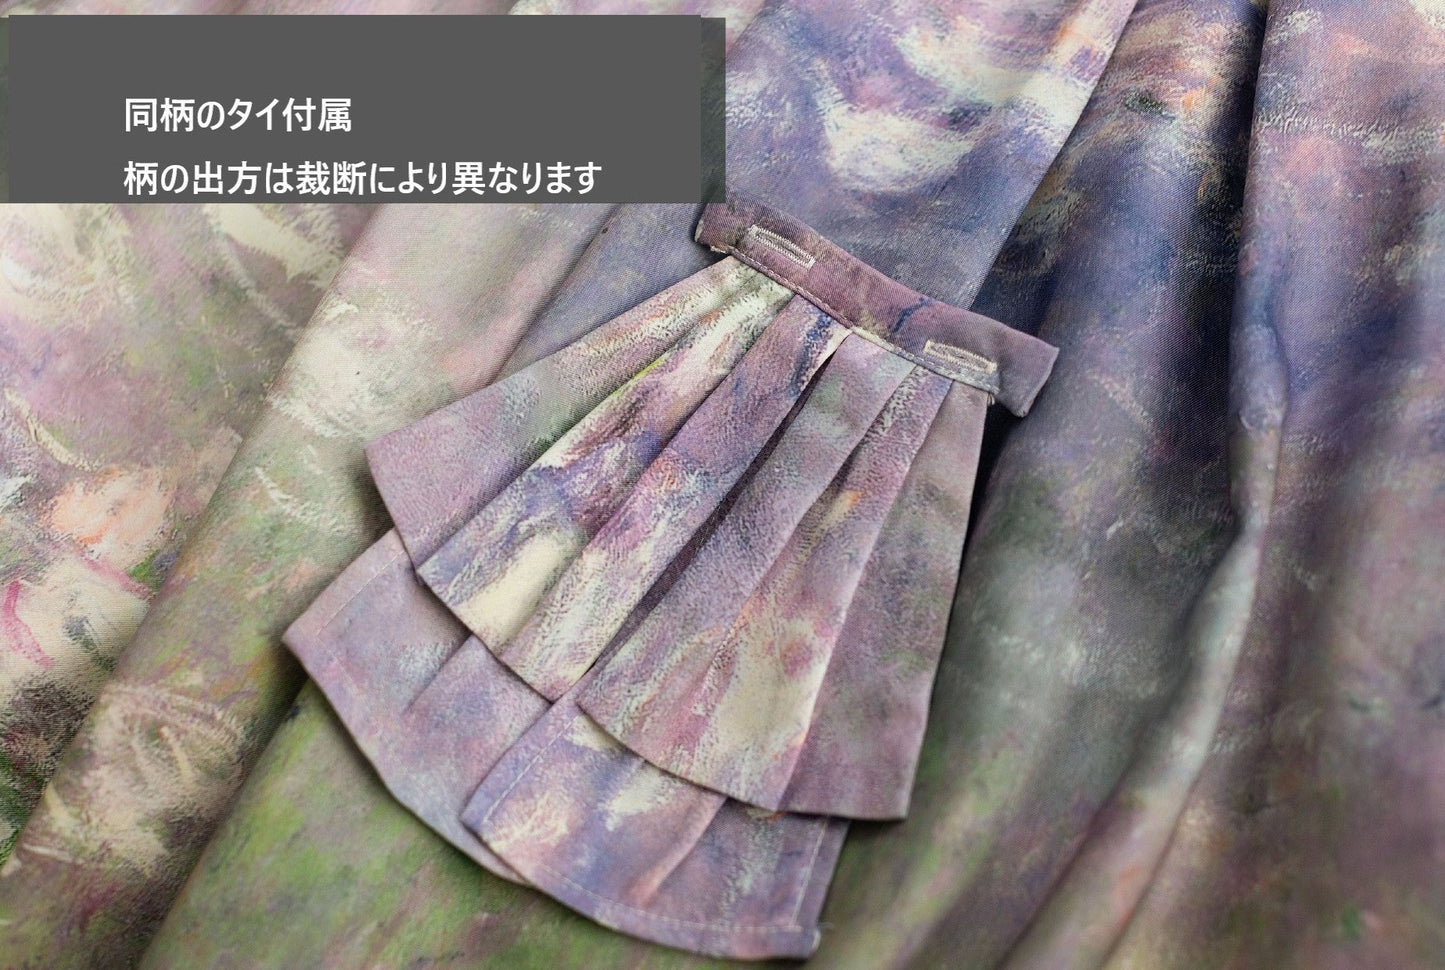 A total of 15 skirts with Monet paintings